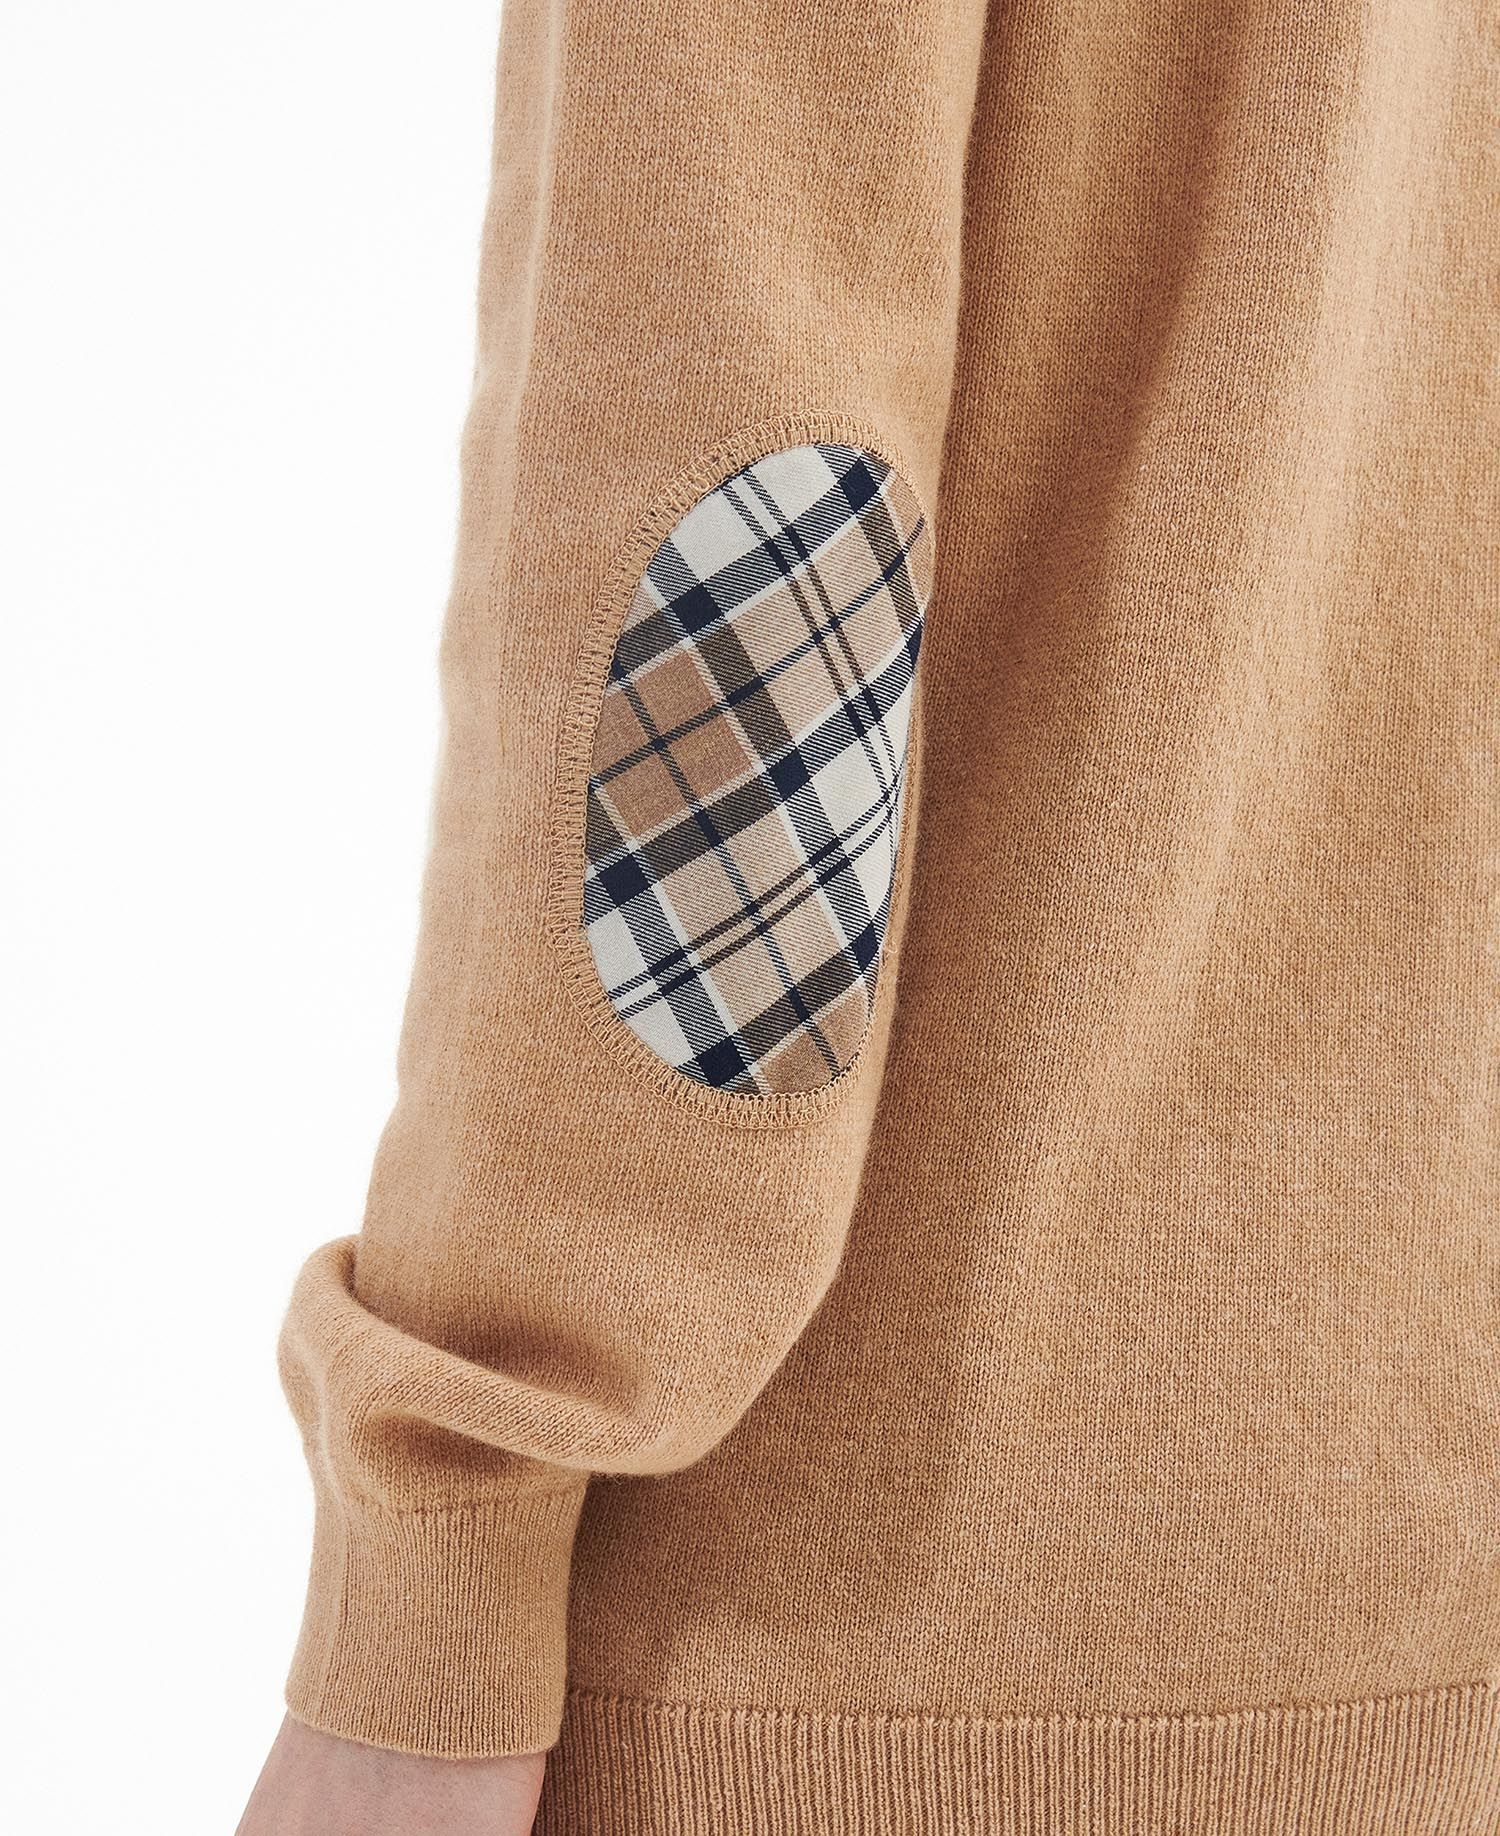 Barbour Pendle Crew Knitted Jumper - Caramel/Fawn